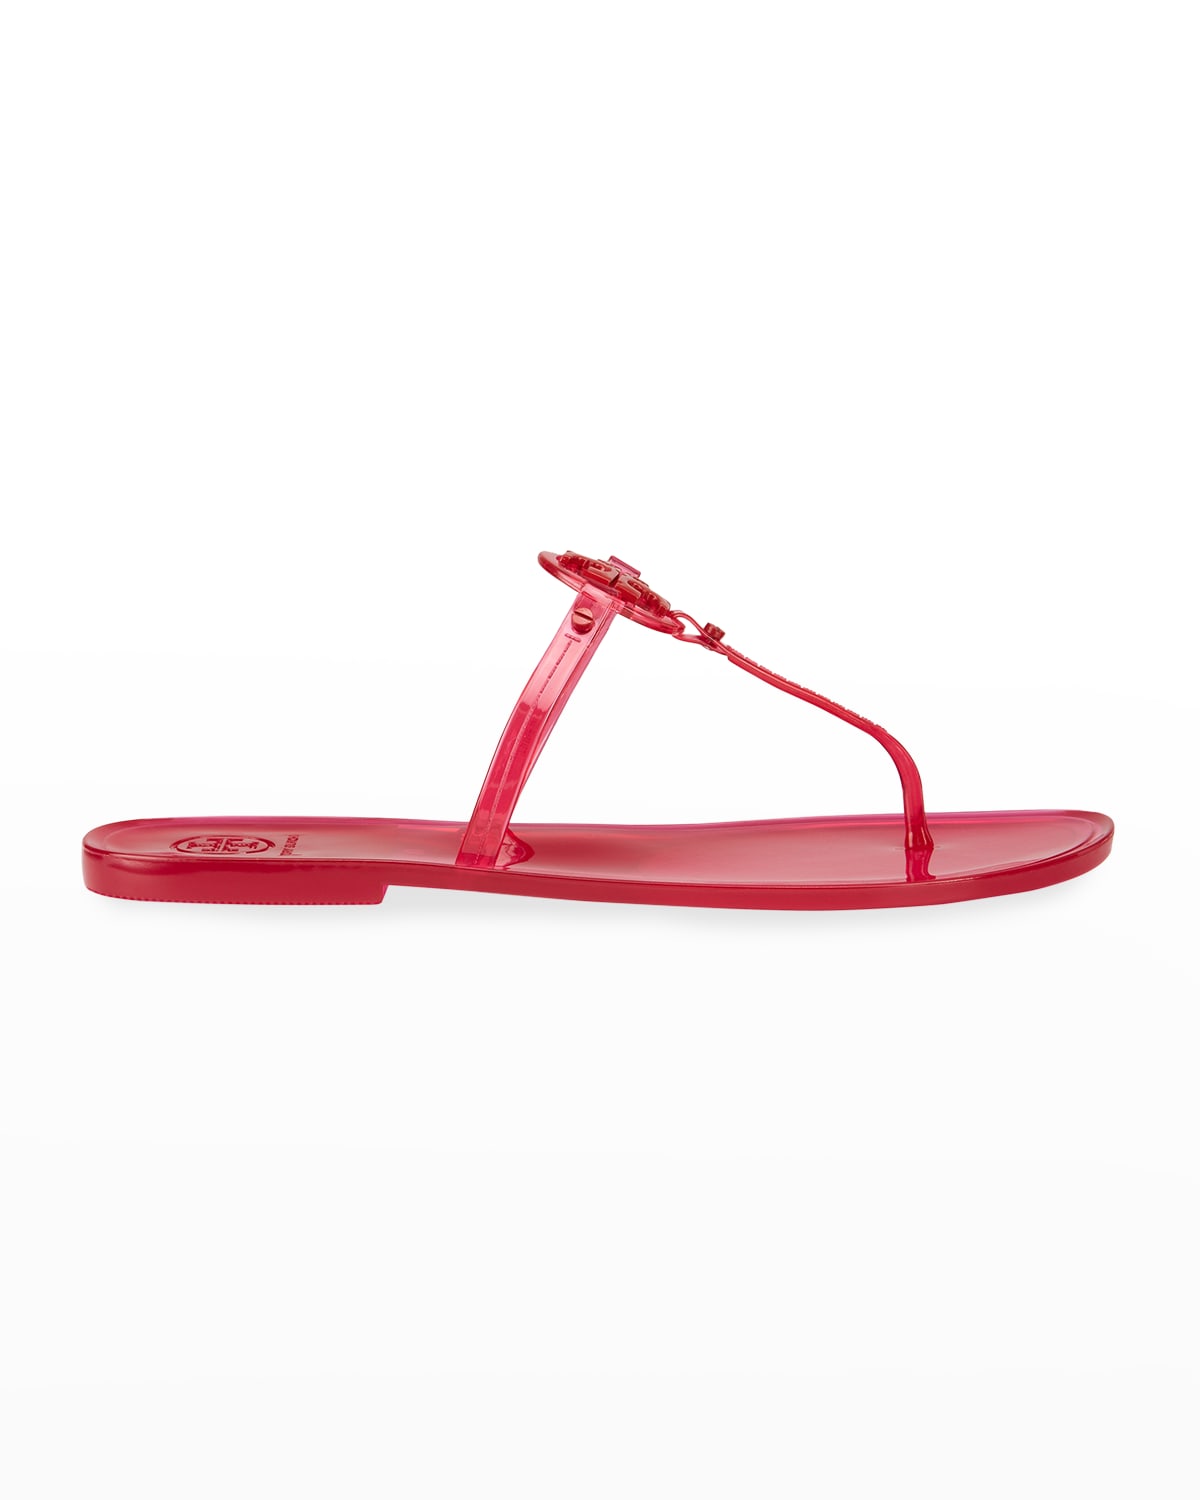 Tory Burch Mini Miller Flat Thong Sandals In Pink Lovesilver